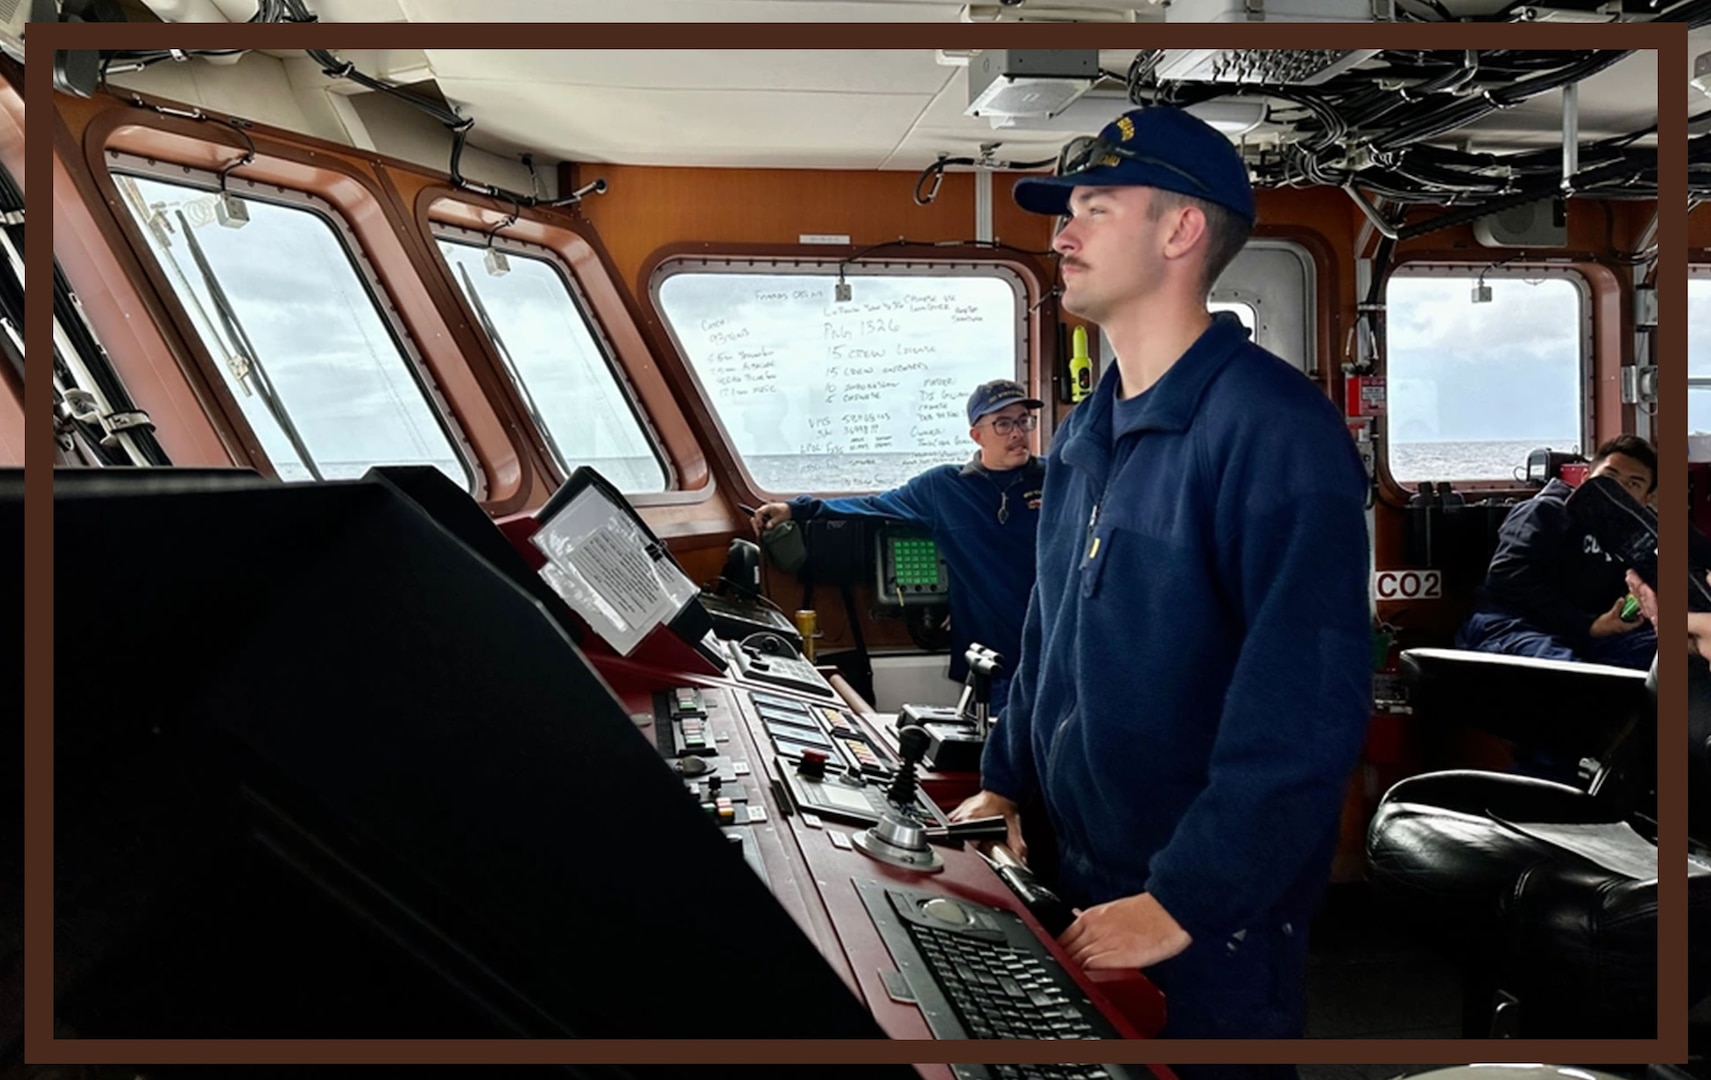 Ensign Peyton Phillips at the helm of USCGC Myrtle Hazard (WPC 1139) in the Coral Sea off Papua New Guinea on Aug. 23, 2023. The U.S. Coast Guard was in Papua New Guinea at the invitation of the PNG government to join their lead in maritime operations to combat illegal fishing and safeguard marine resources following the recent signing and ratification of a bilateral maritime law enforcement agreement between the United States and Papua New Guinea. (U.S. Coast Guard photo by Chief Warrant Officer Sara Muir)